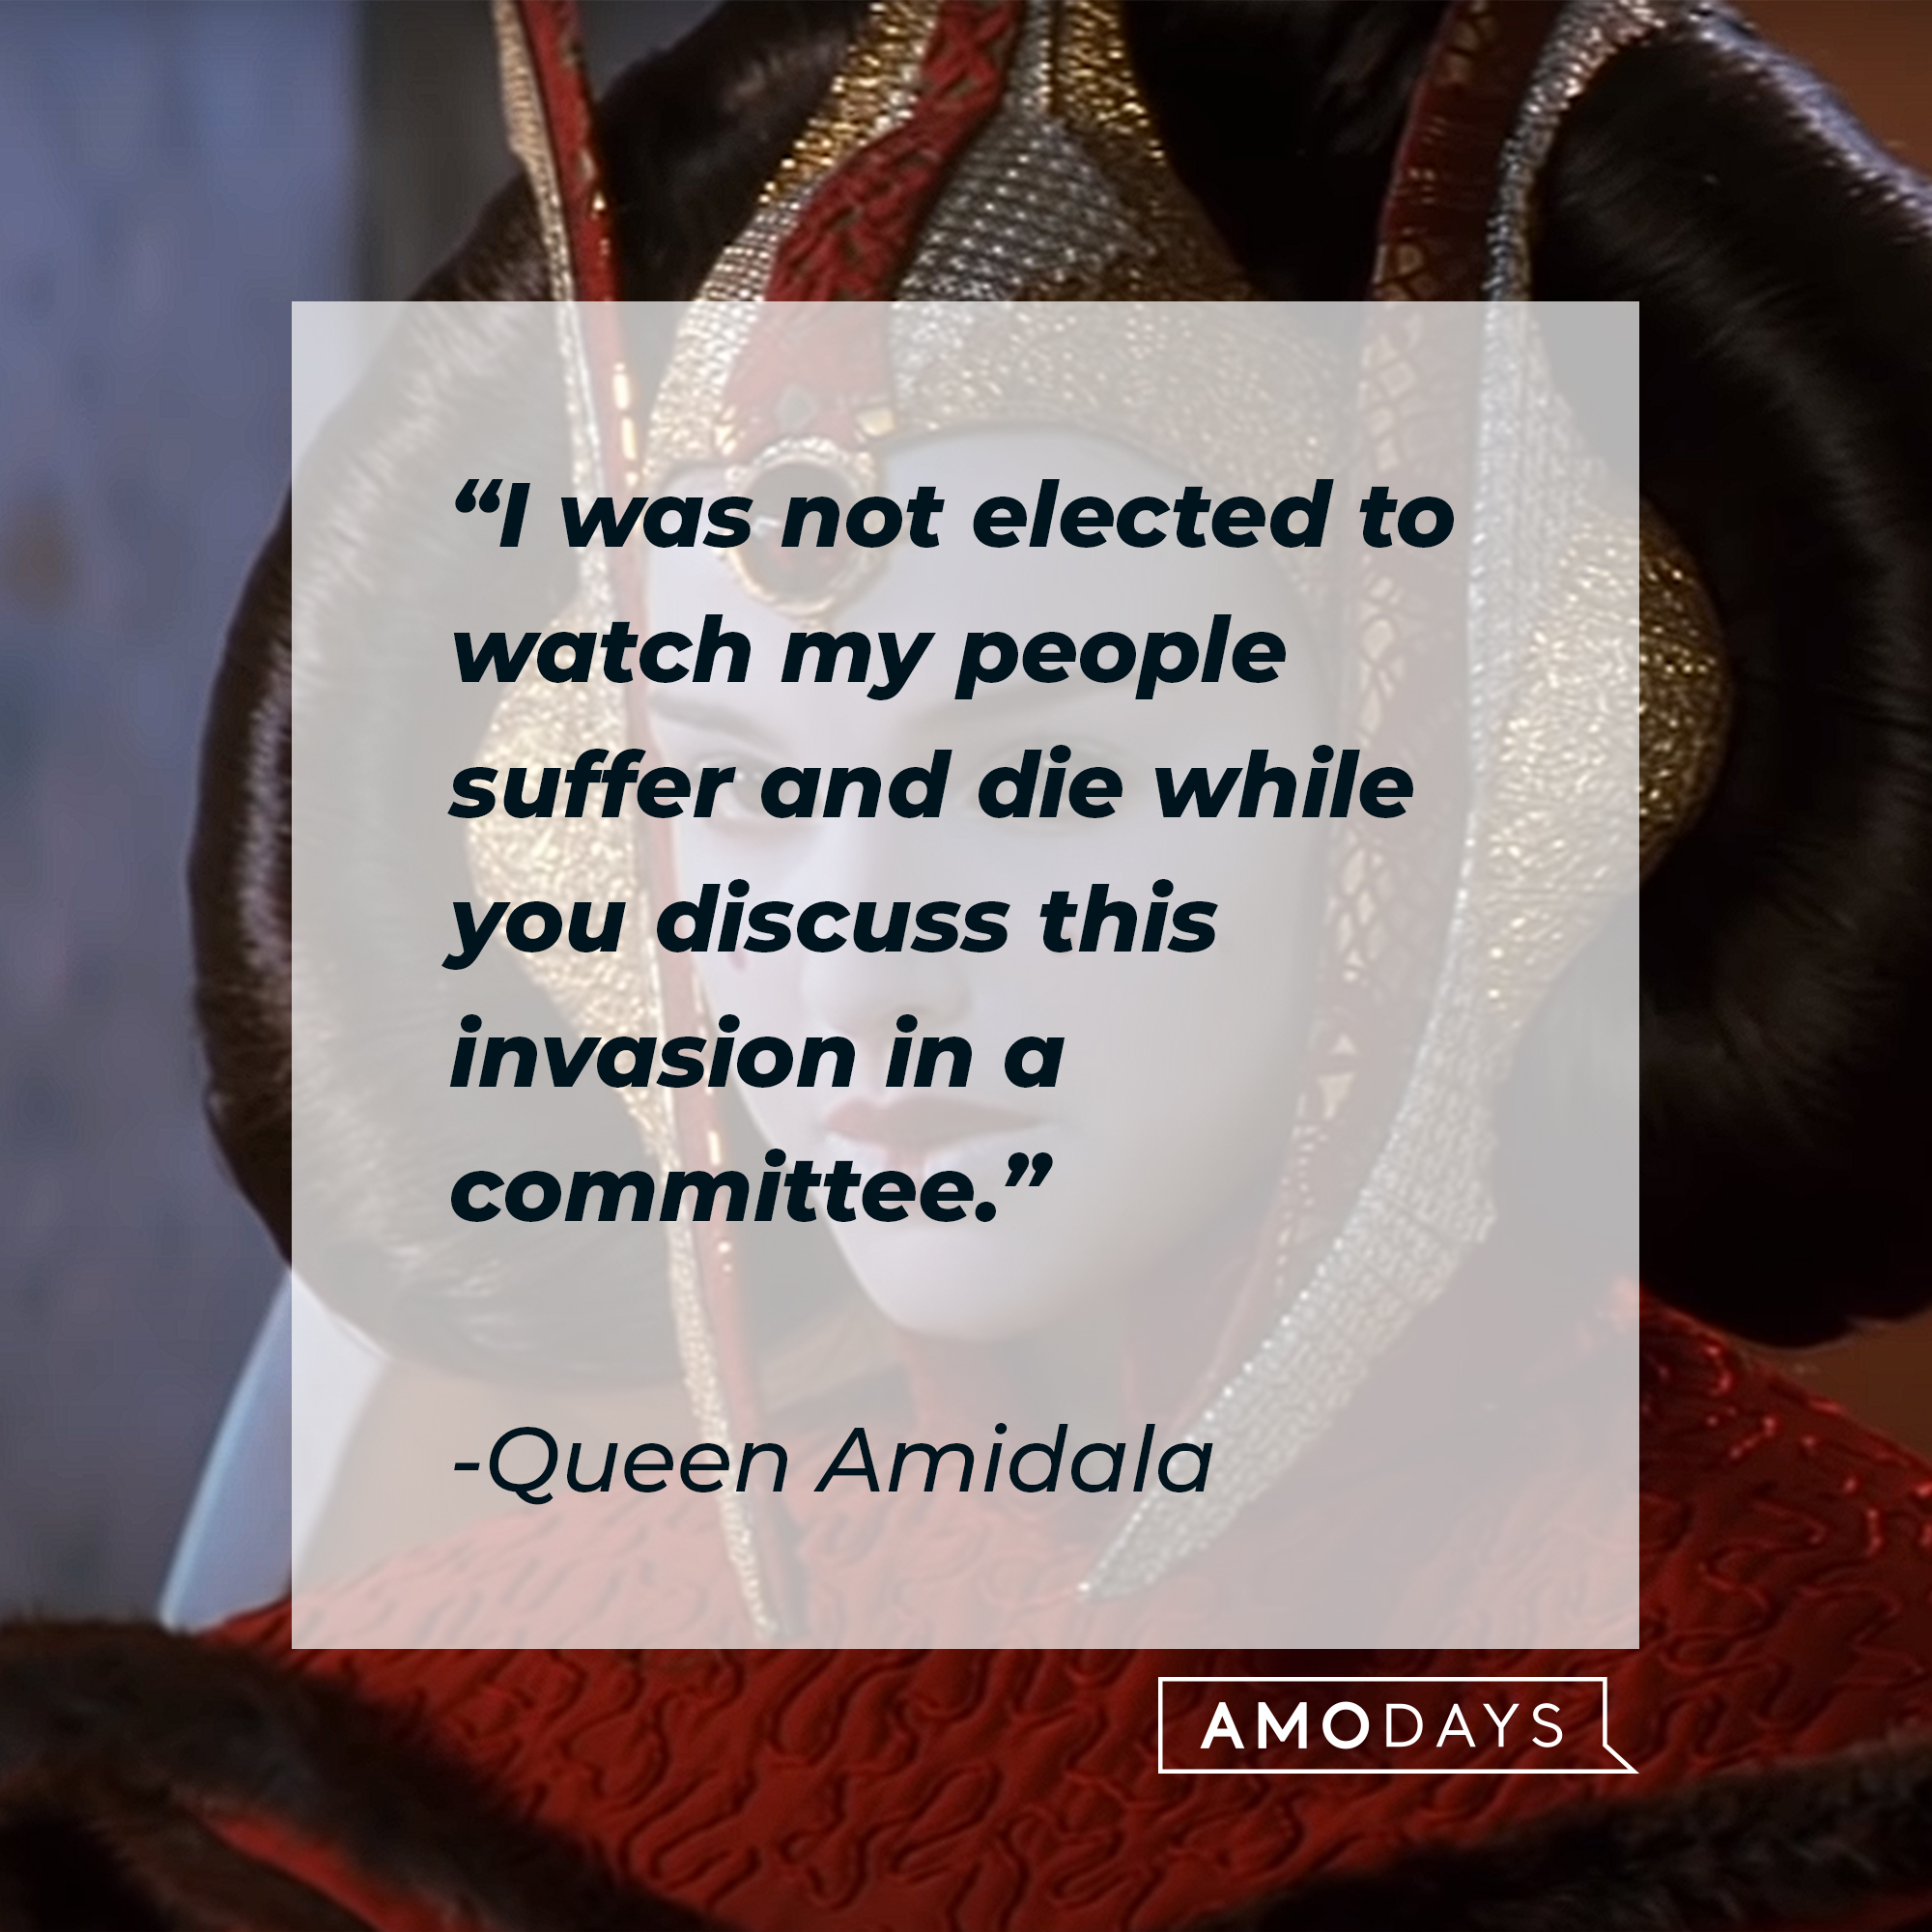 Queen Amidala with her quote: "I was not elected to watch my people suffer and die while you discuss this invasion in a committee." | Source: Youtube/StarWars